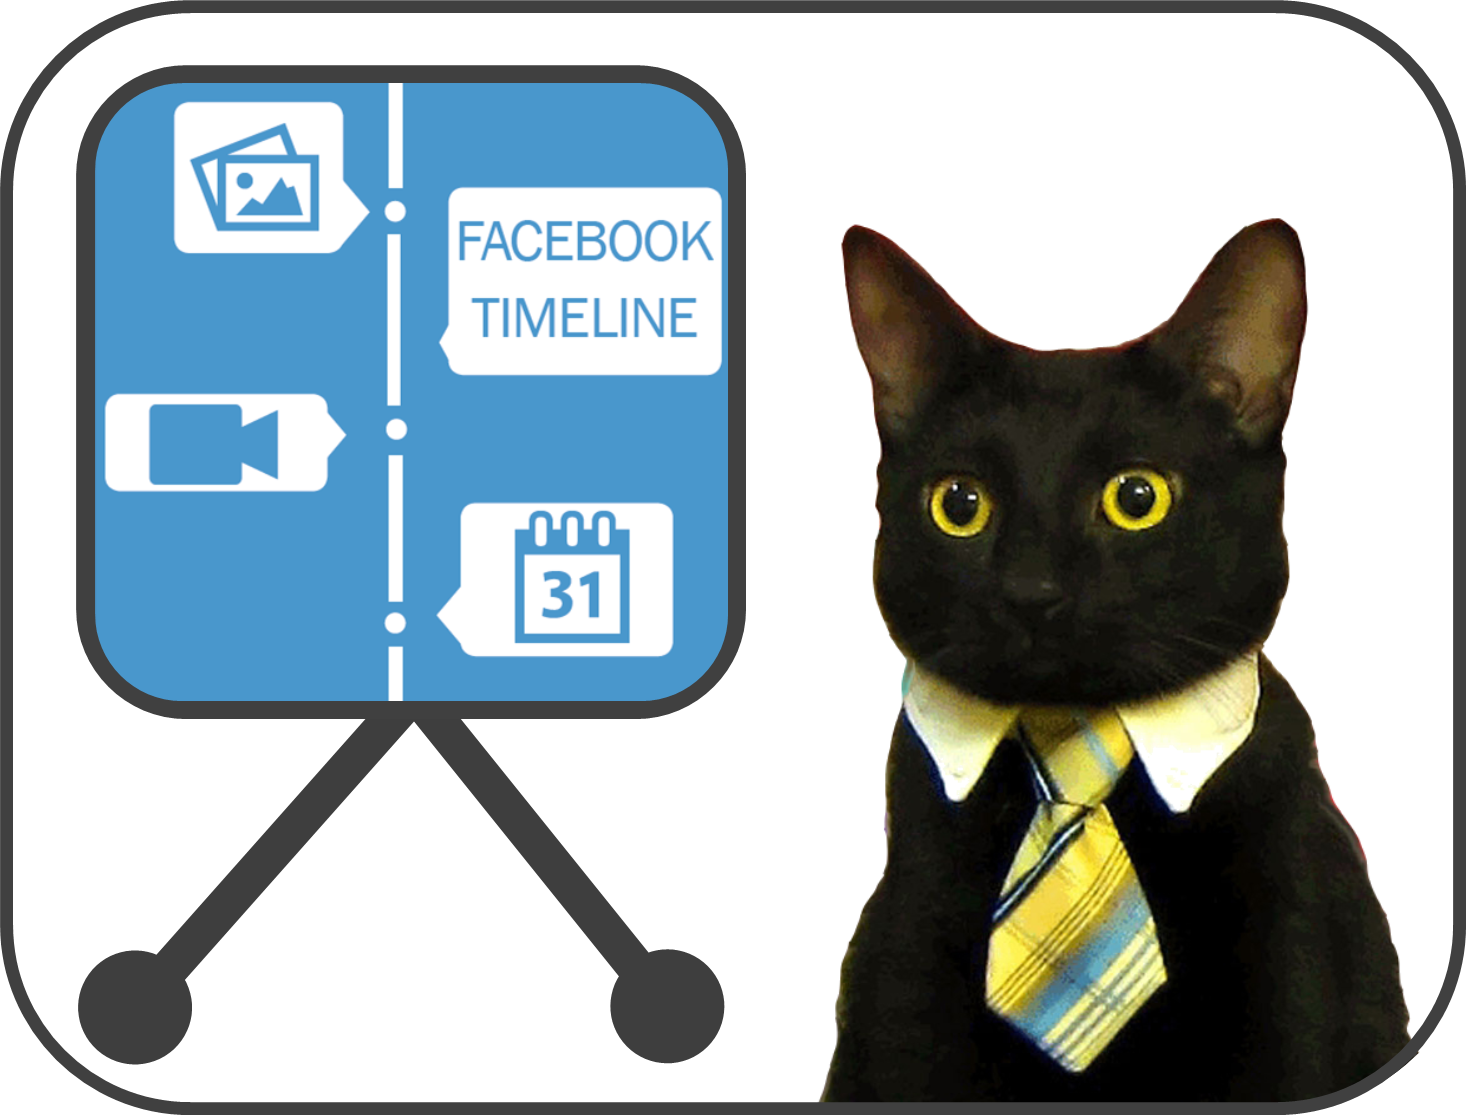 Facebook for business how to create business pages with timeline